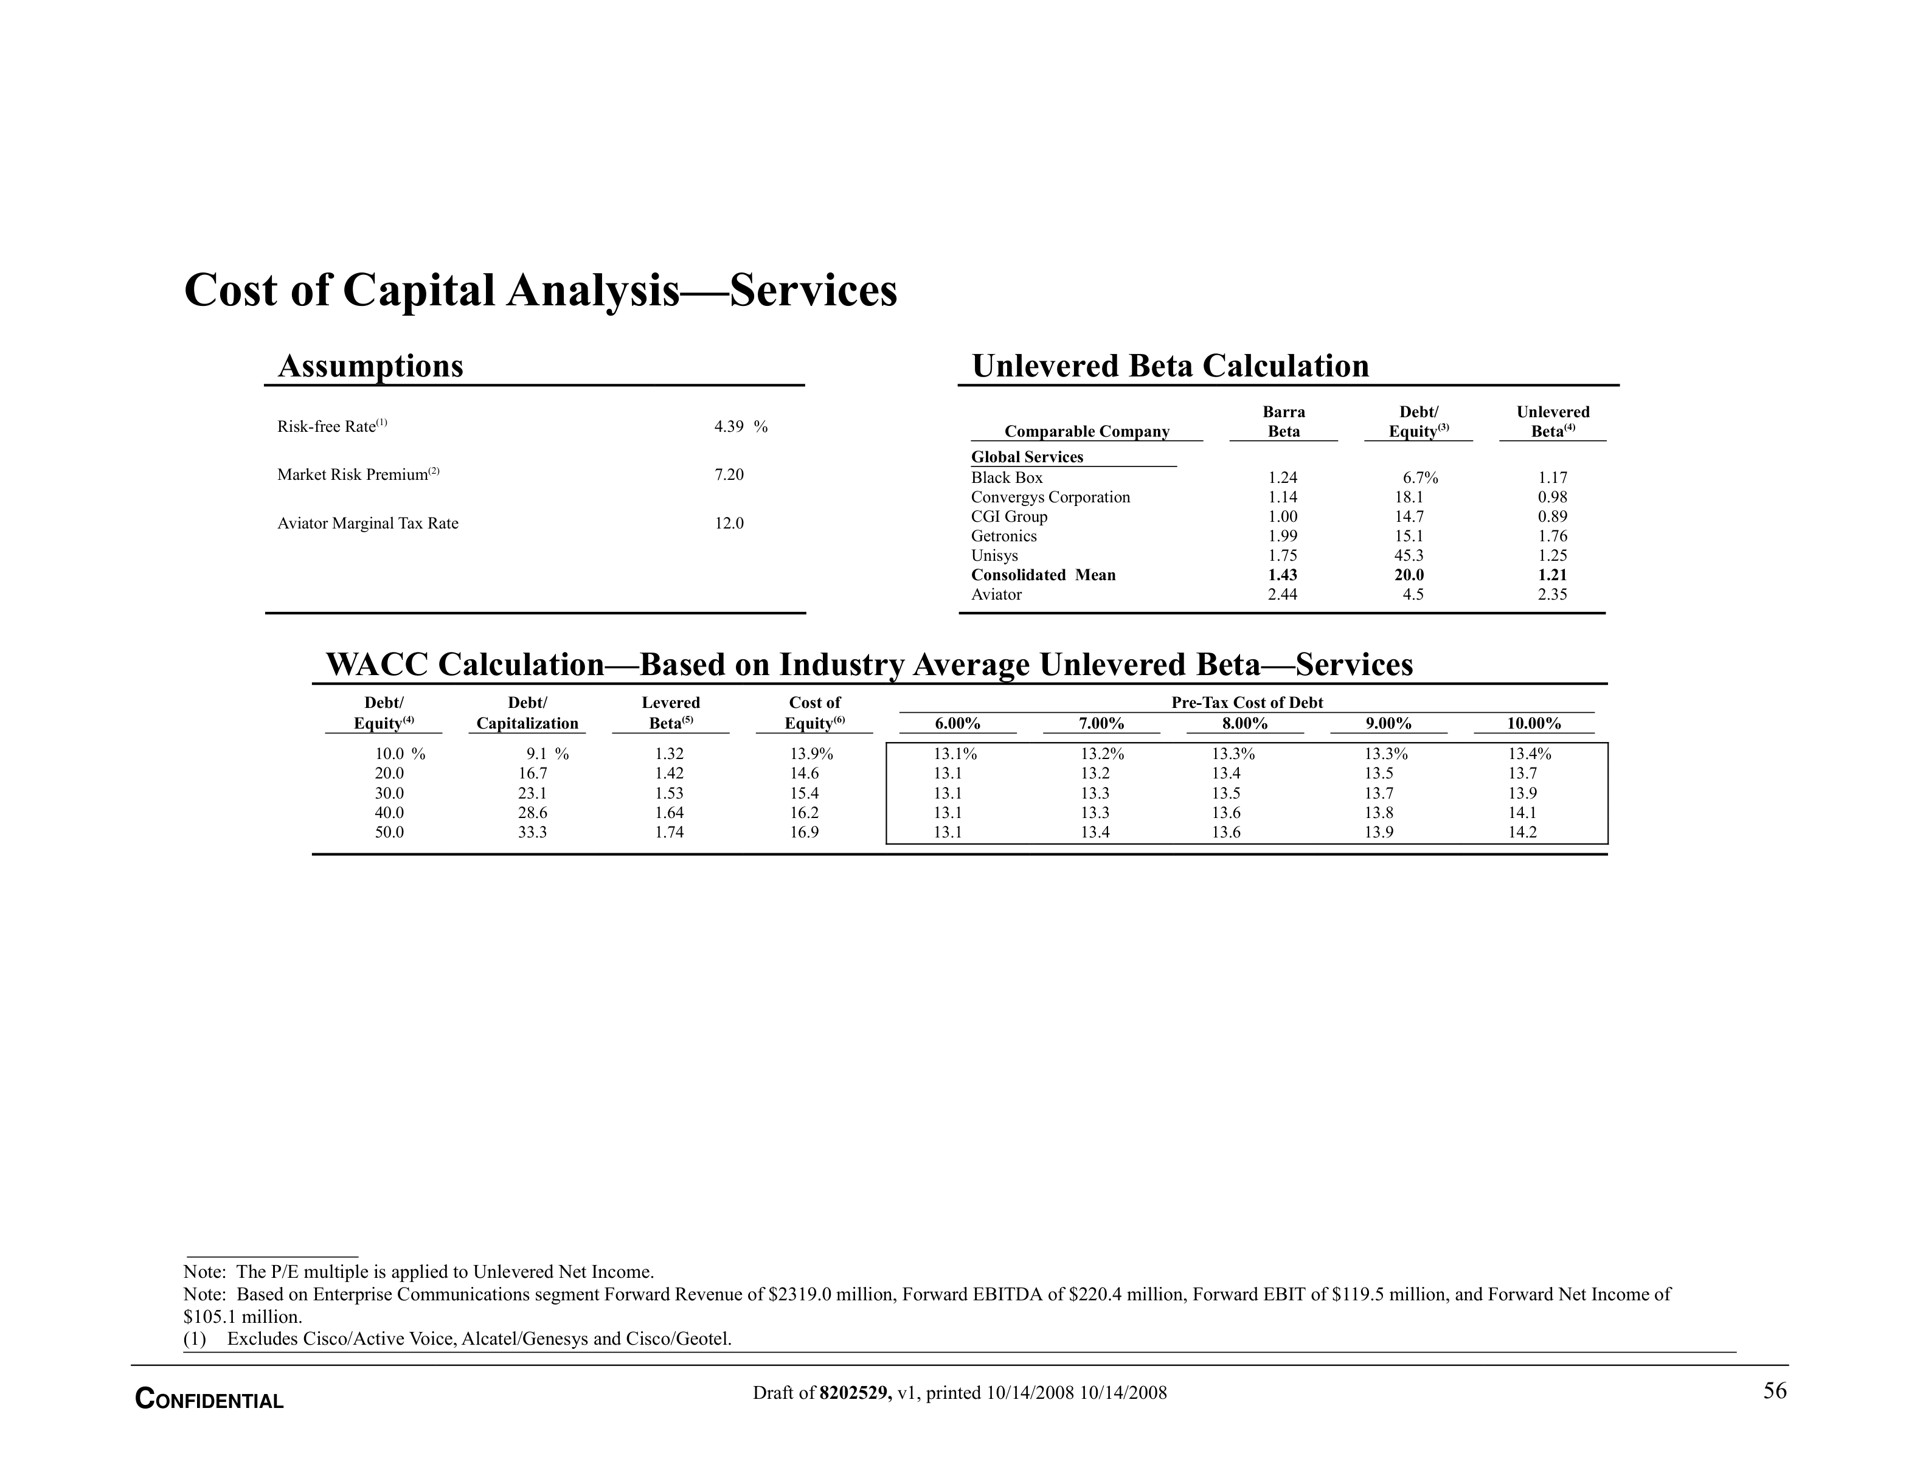 cost of capital analysis services assumptions beta calculation calculation based on industry average beta services | Bear Stearns